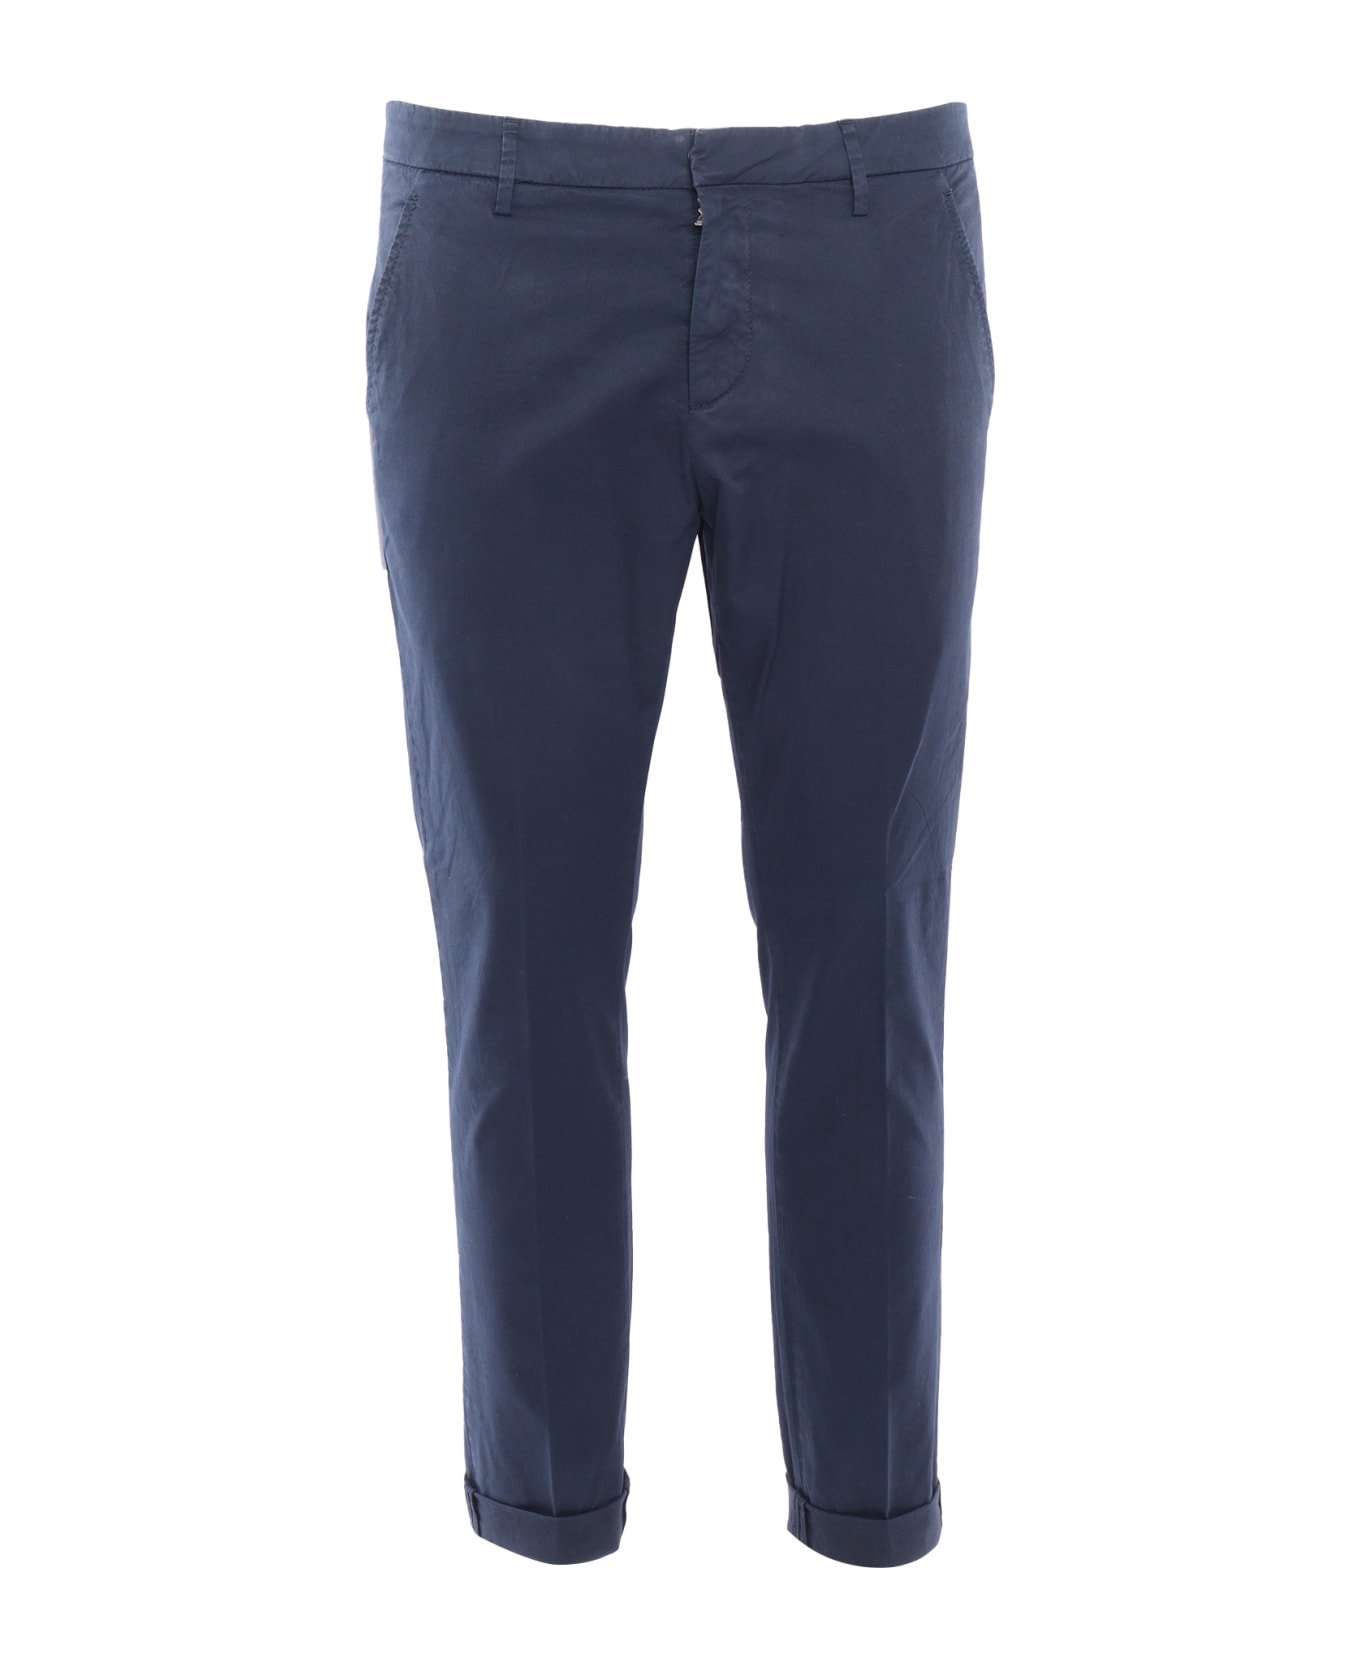 Dondup Blue Chino Trousers - BLUE ボトムス